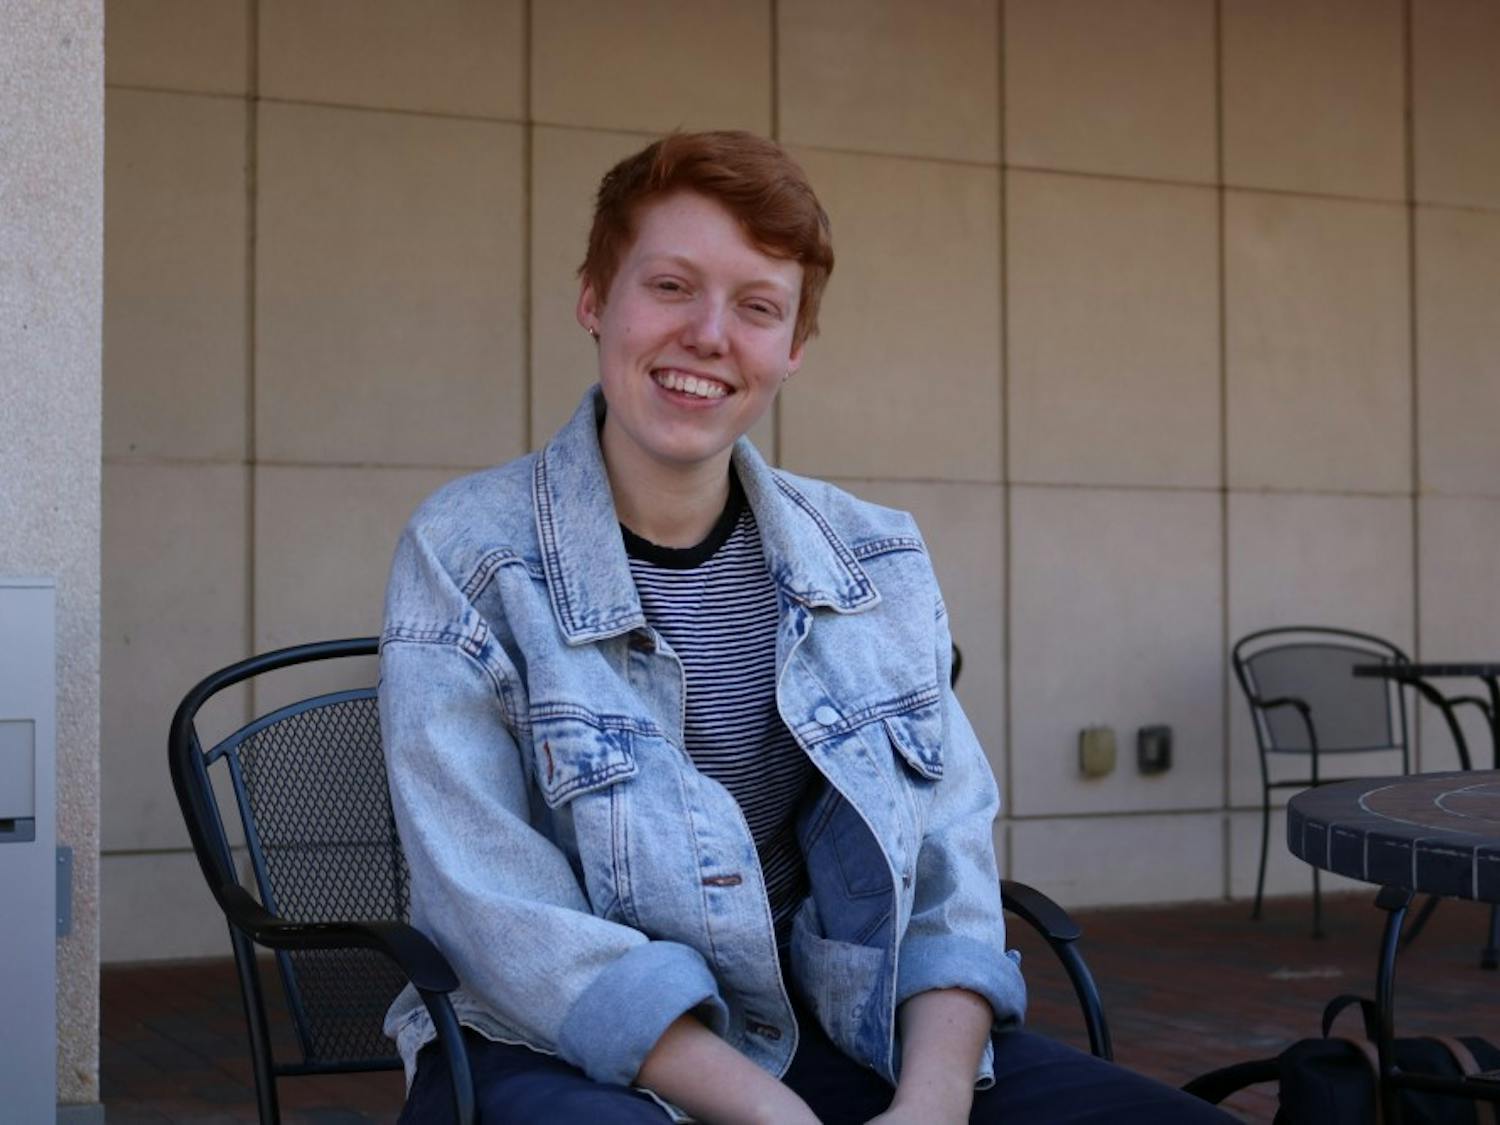 Senior Brennan Lewis sits in front of the Union on Friday, March 22, 2019. Brennan helped to found Queer NC when they were in high school, which is an organziation that hosts events and activities for LGBTQ youth.